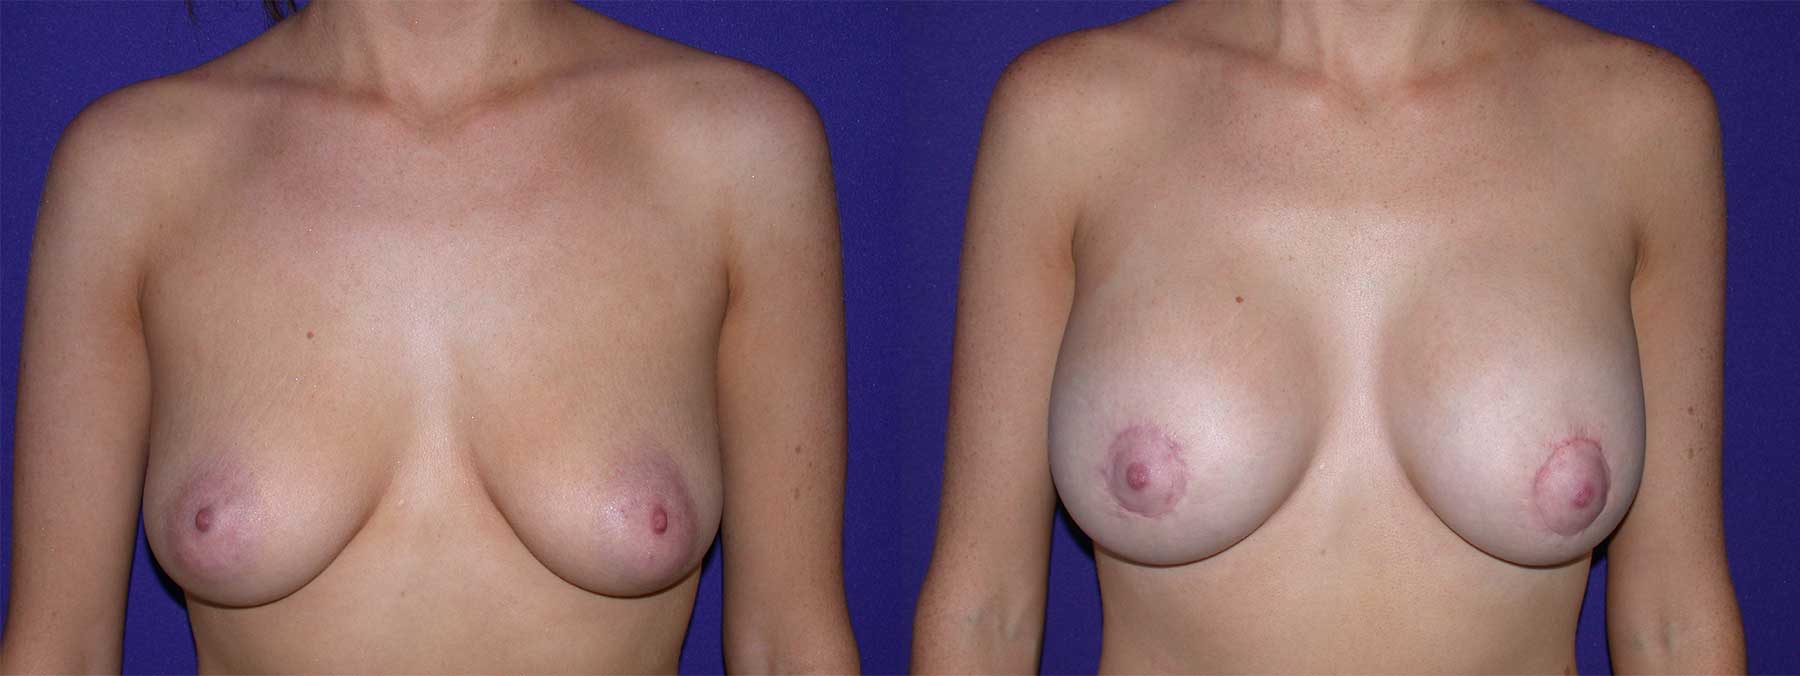 Before and After Image of Augmentation Mastoplexy